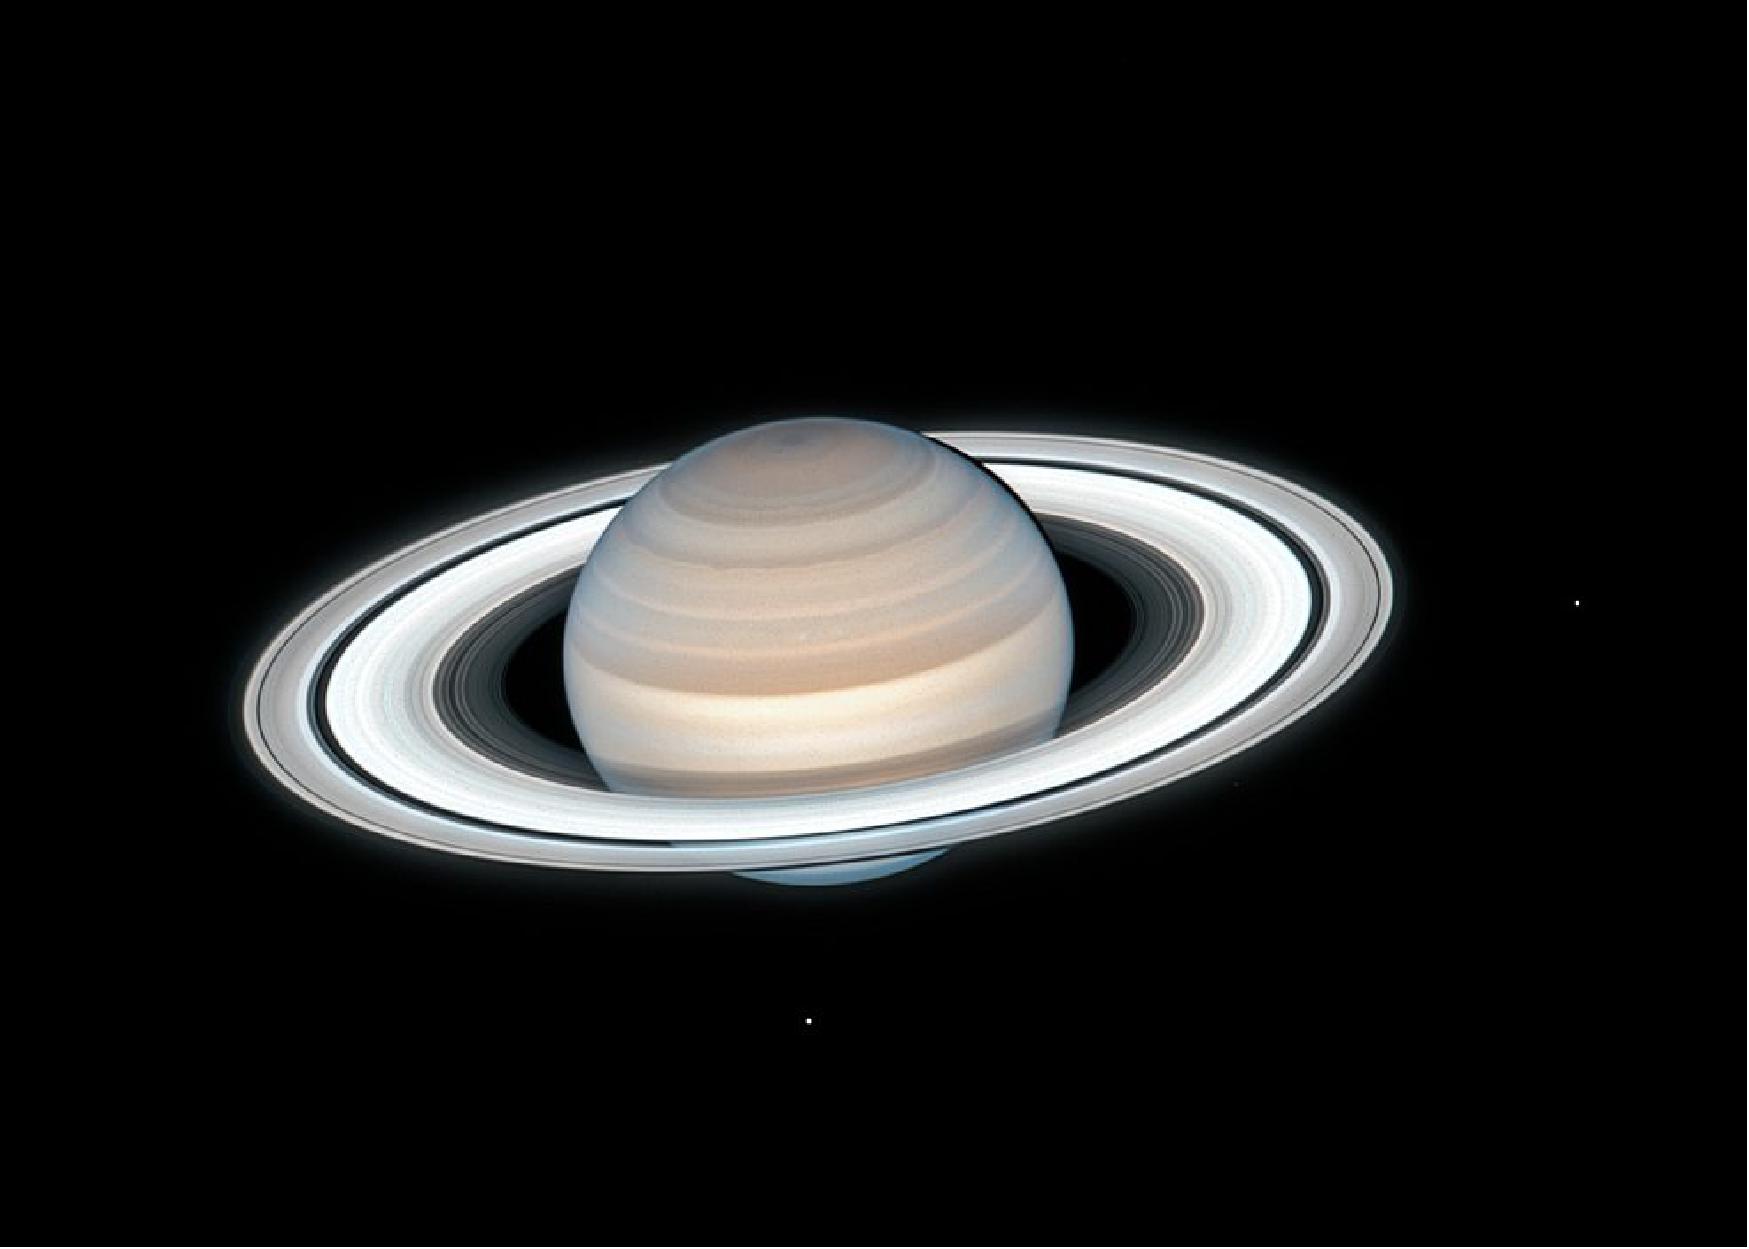 Figure 45: NASA's Hubble Space Telescope captured this image of Saturn on July 4, 2020. Two of Saturn's icy moons are clearly visible in this exposure: Mimas at right, and Enceladus at bottom. This image is taken as part of the Outer Planets Atmospheres Legacy (OPAL) project. OPAL is helping scientists understand the atmospheric dynamics and evolution of our solar system's gas giant planets. In Saturn's case, astronomers continue tracking shifting weather patterns and storms (image credits: NASA, ESA, A. Simon (Goddard Space Flight Center), M.H. Wong (University of California, Berkeley), and the OPAL Team)